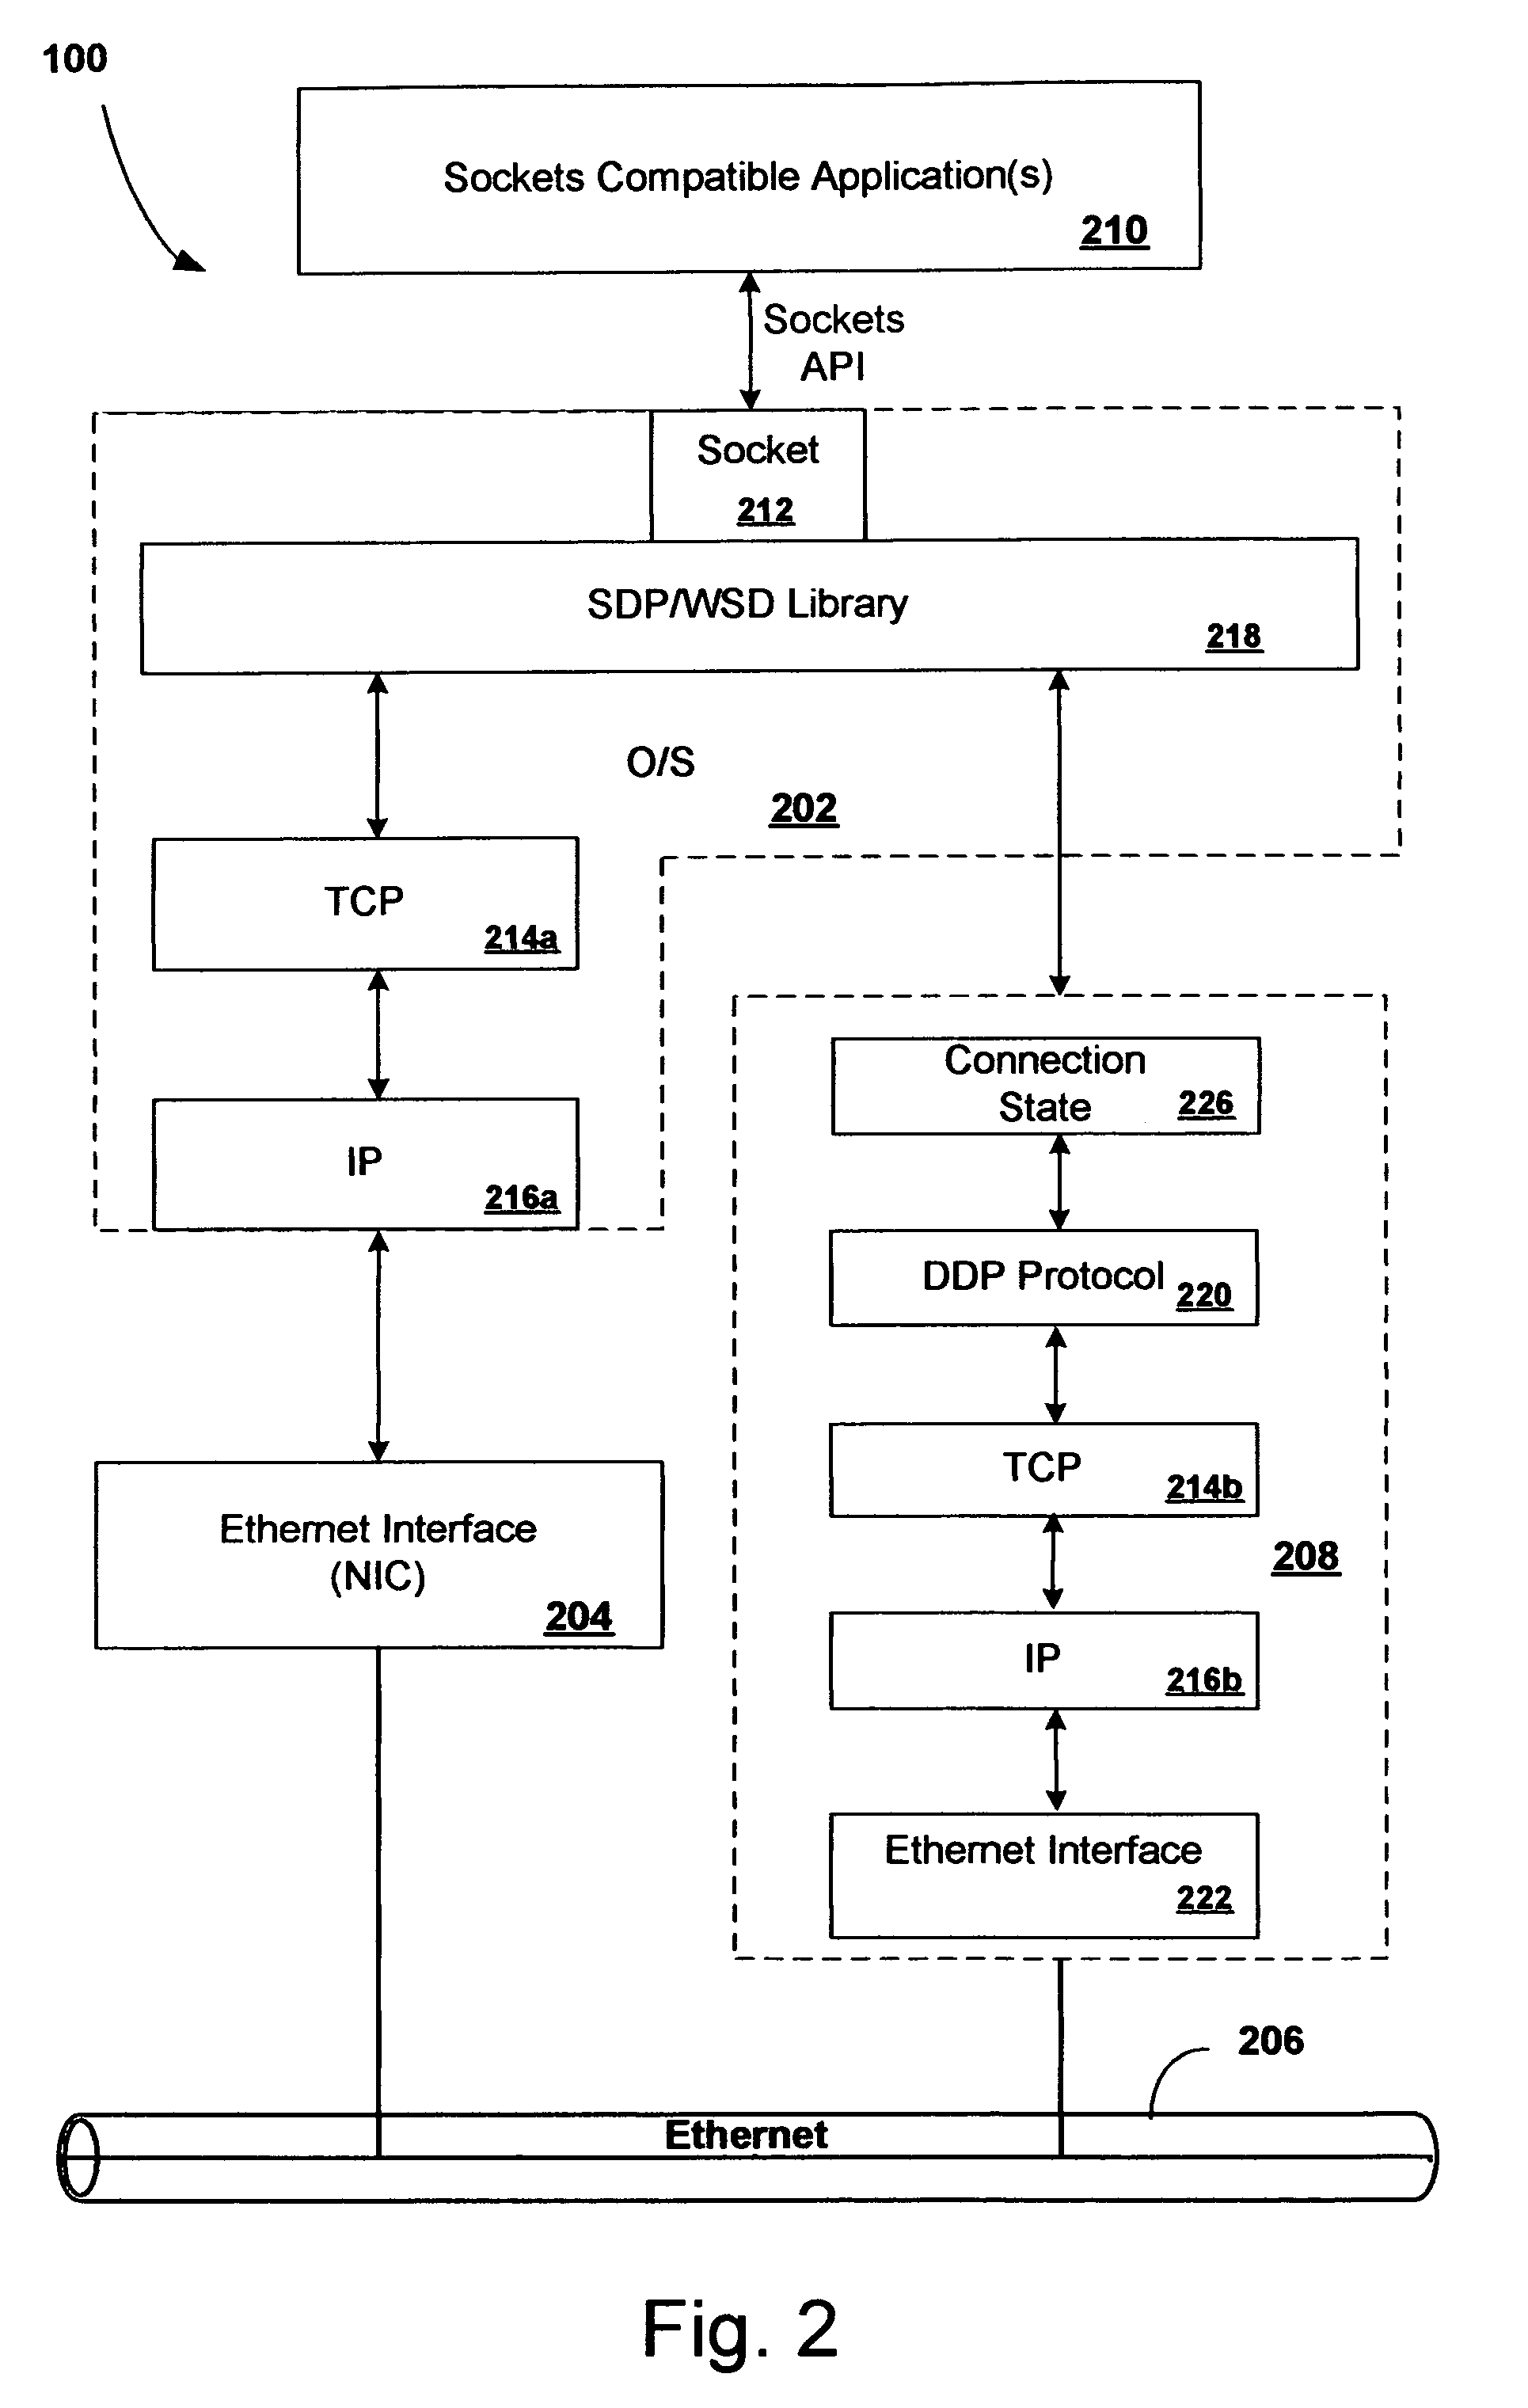 Aggregation of network resources providing offloaded connections between applications over a network